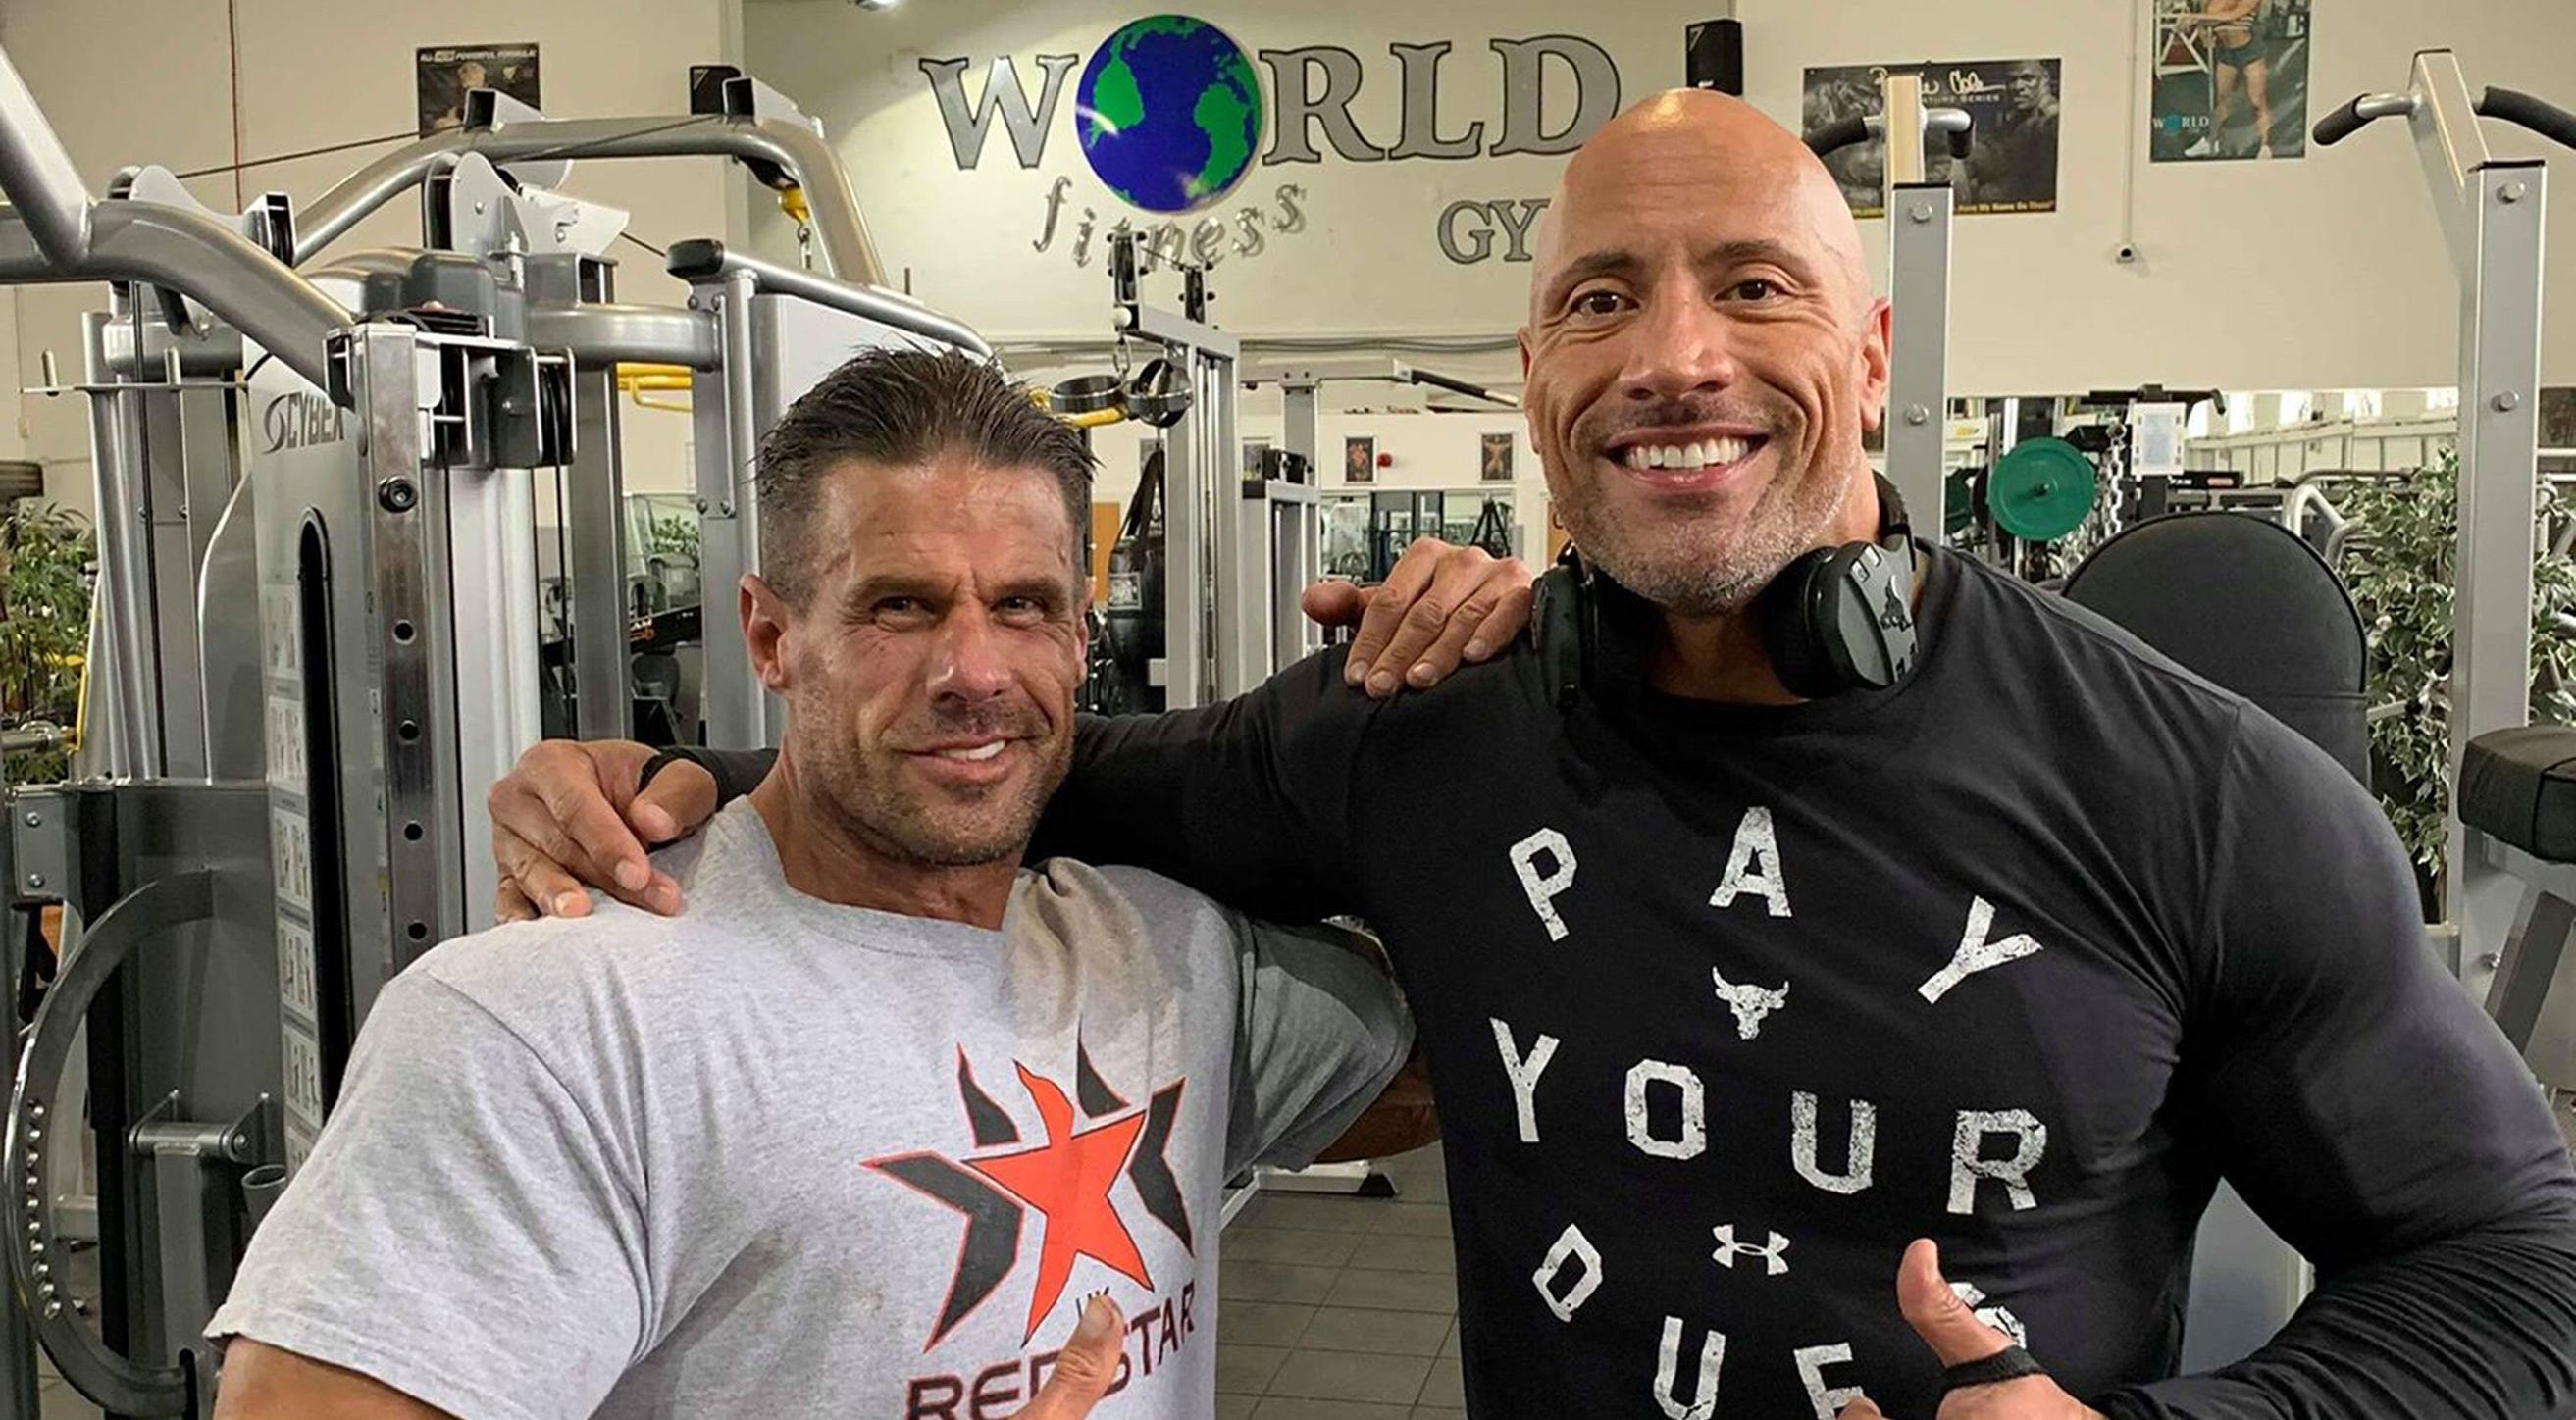 The Rock visits Doncaster gym for workout between Hobbs and Shaw scenes |  